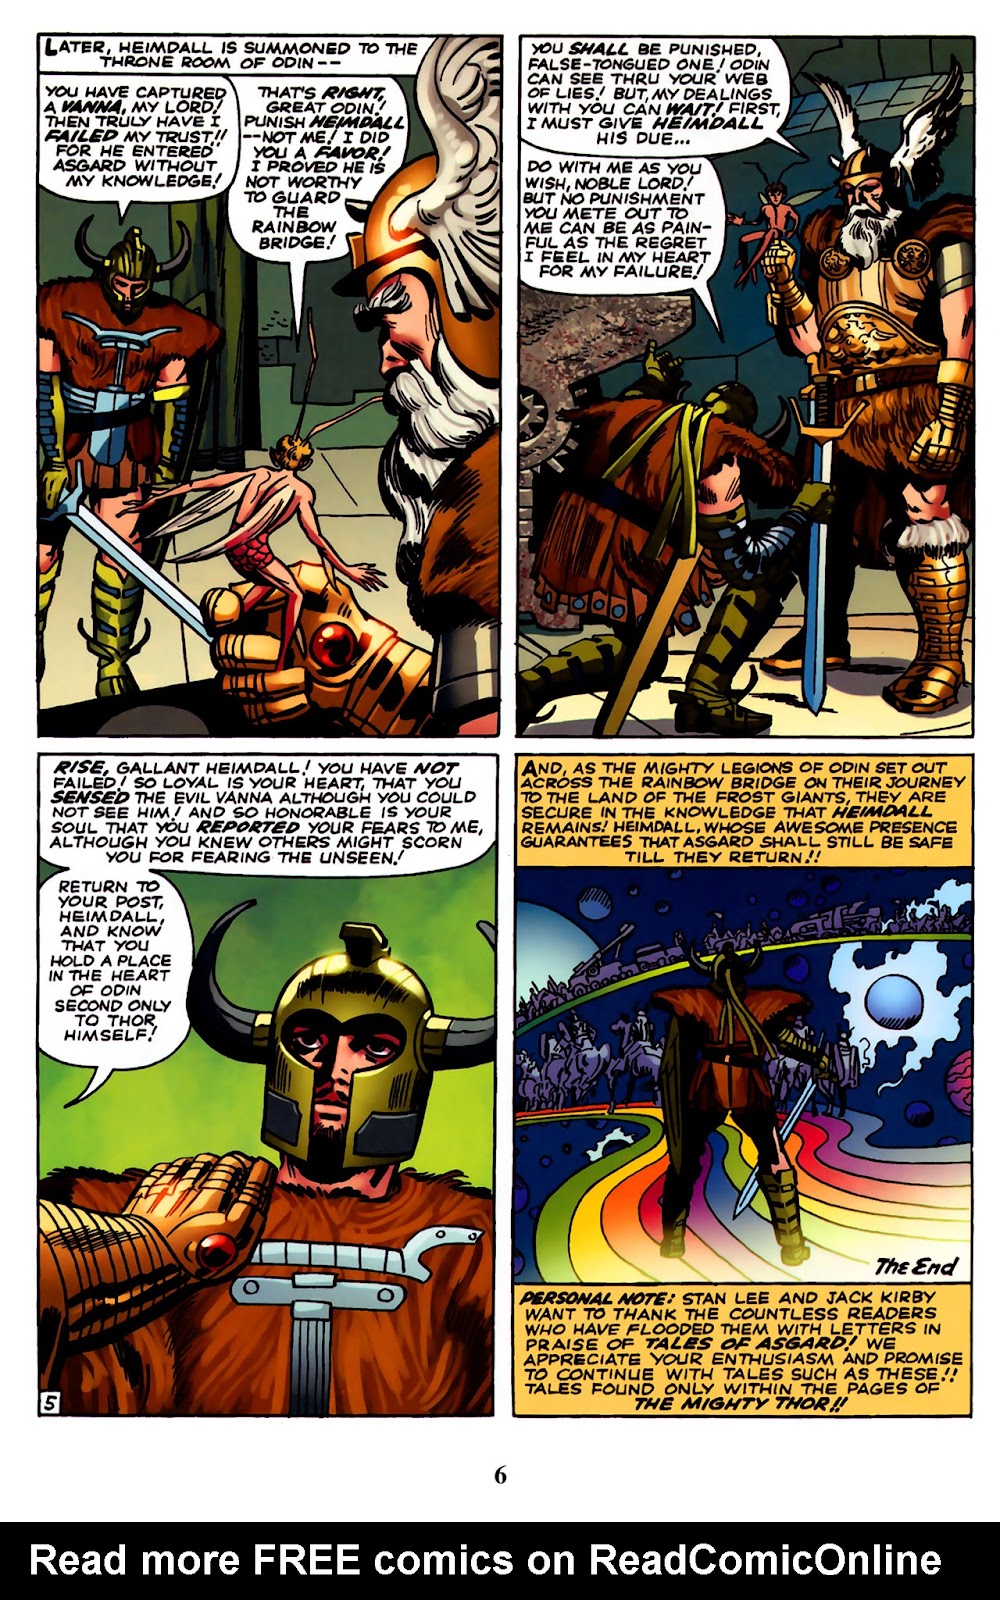 Thor: Tales of Asgard by Stan Lee & Jack Kirby issue 2 - Page 8